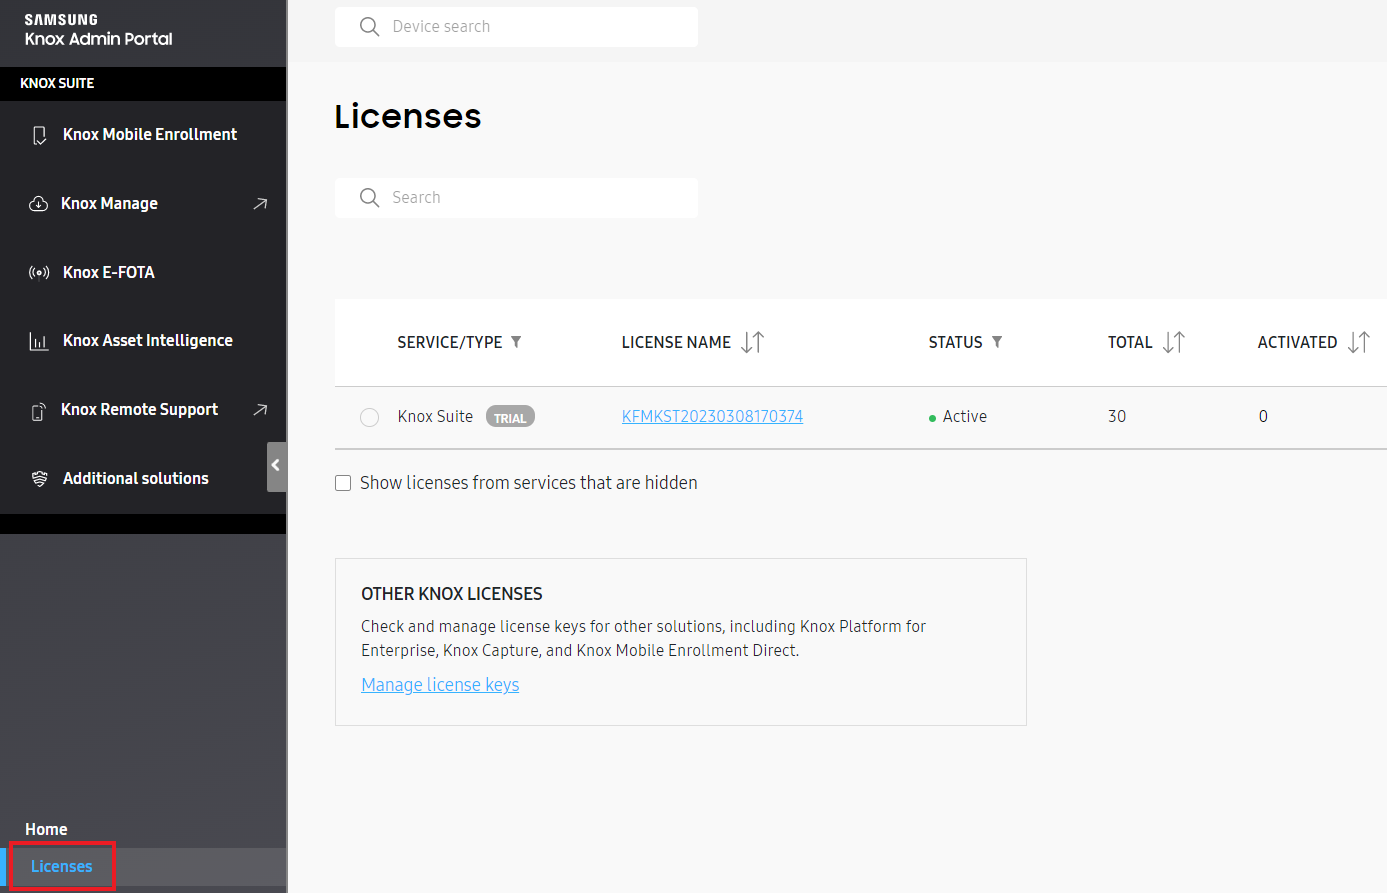 The Licenses tab from the Knox Admin Portal navigation pane